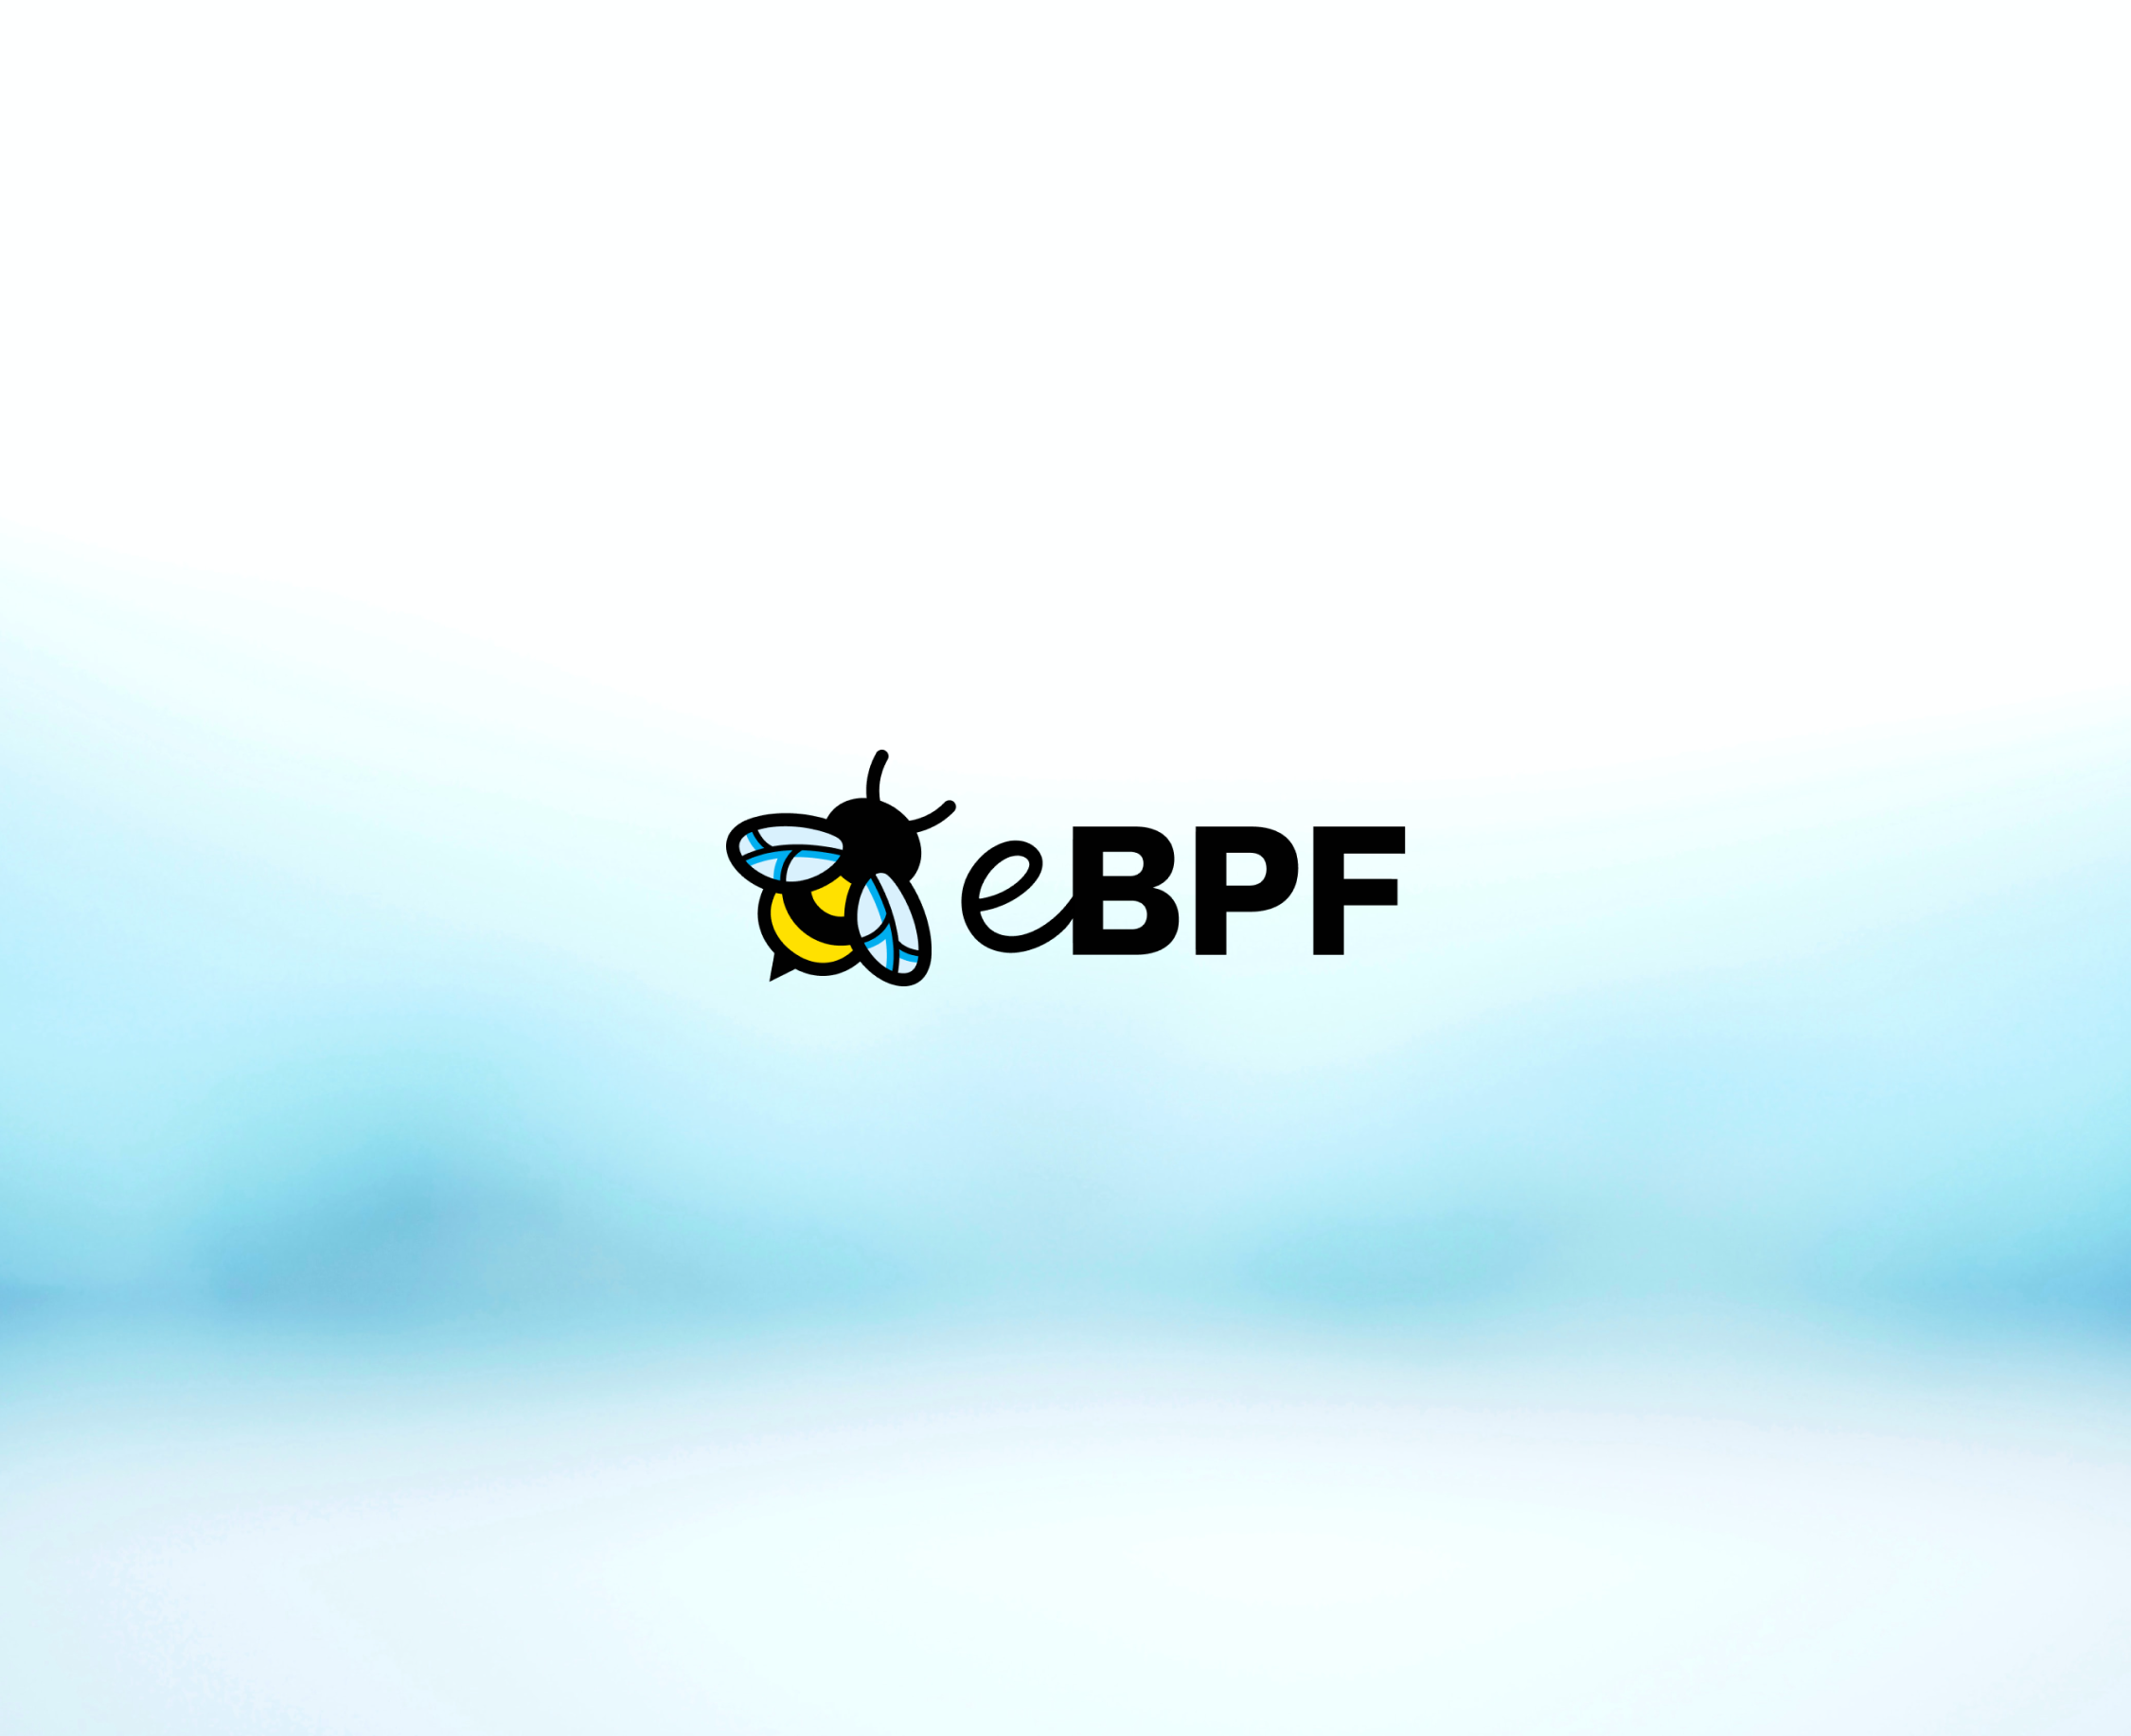 What is eBPF?